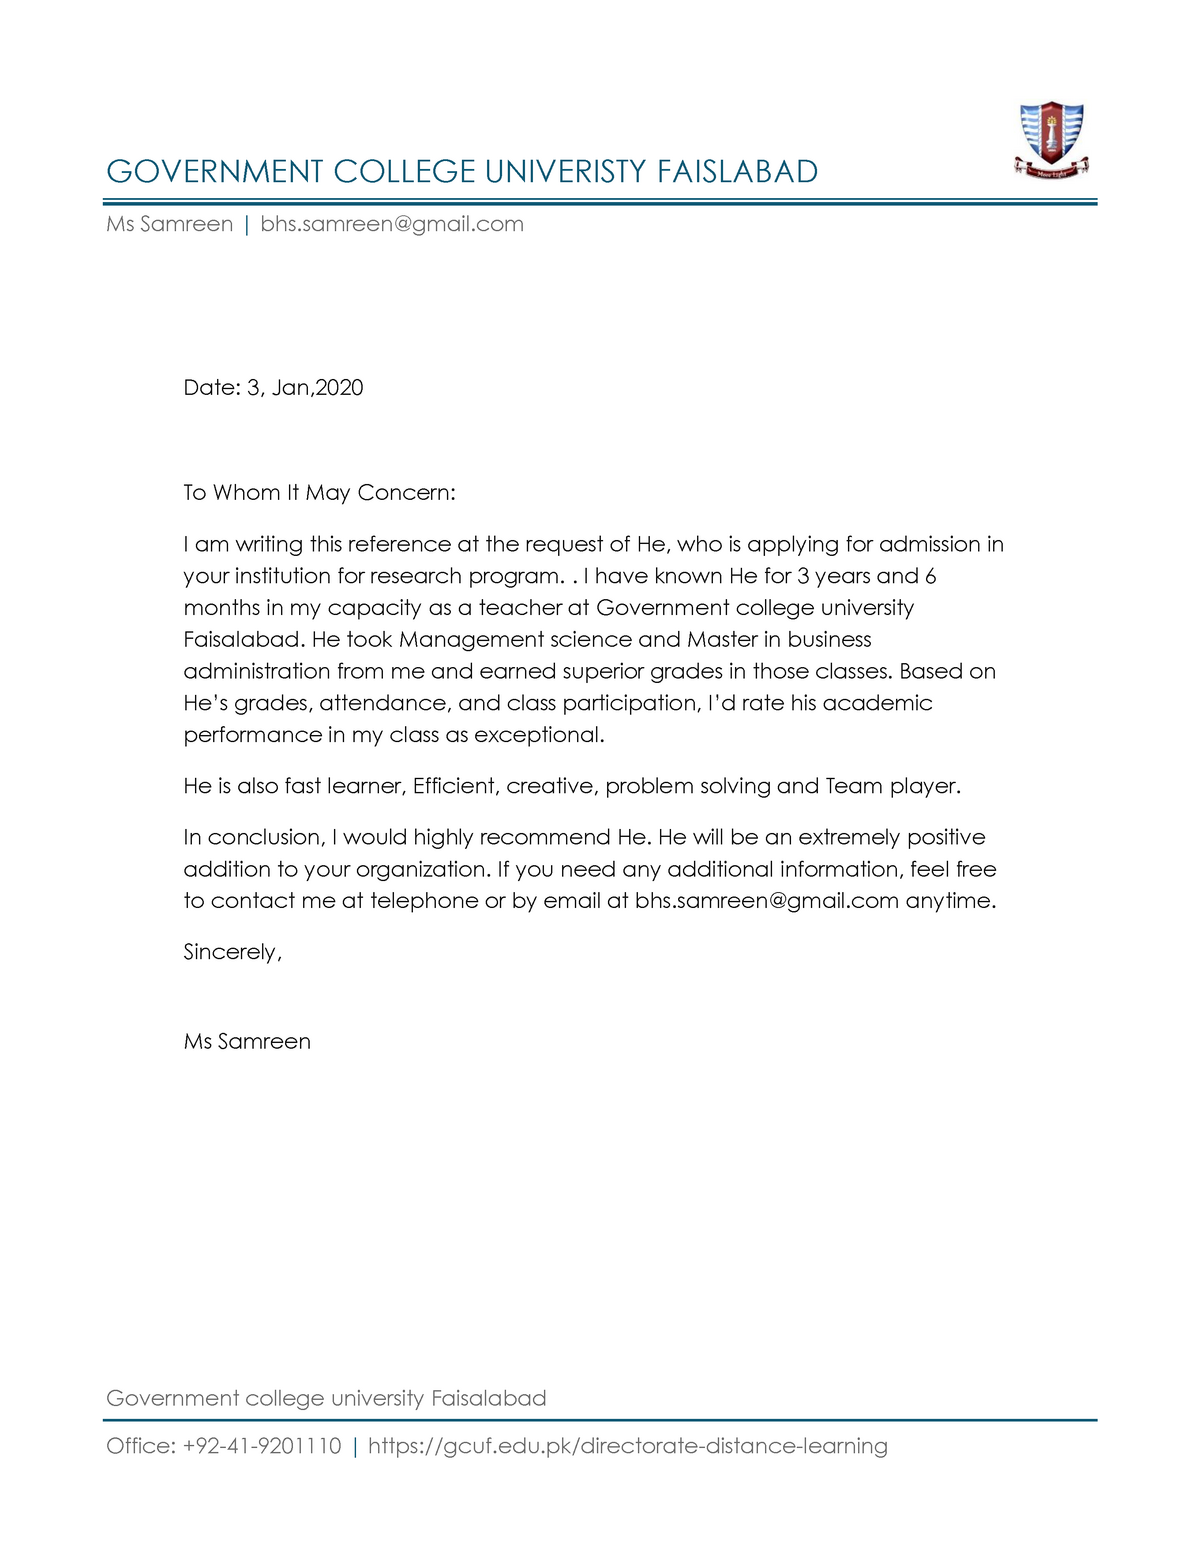 Letter Of recommendation MS samreen - Government college university ...